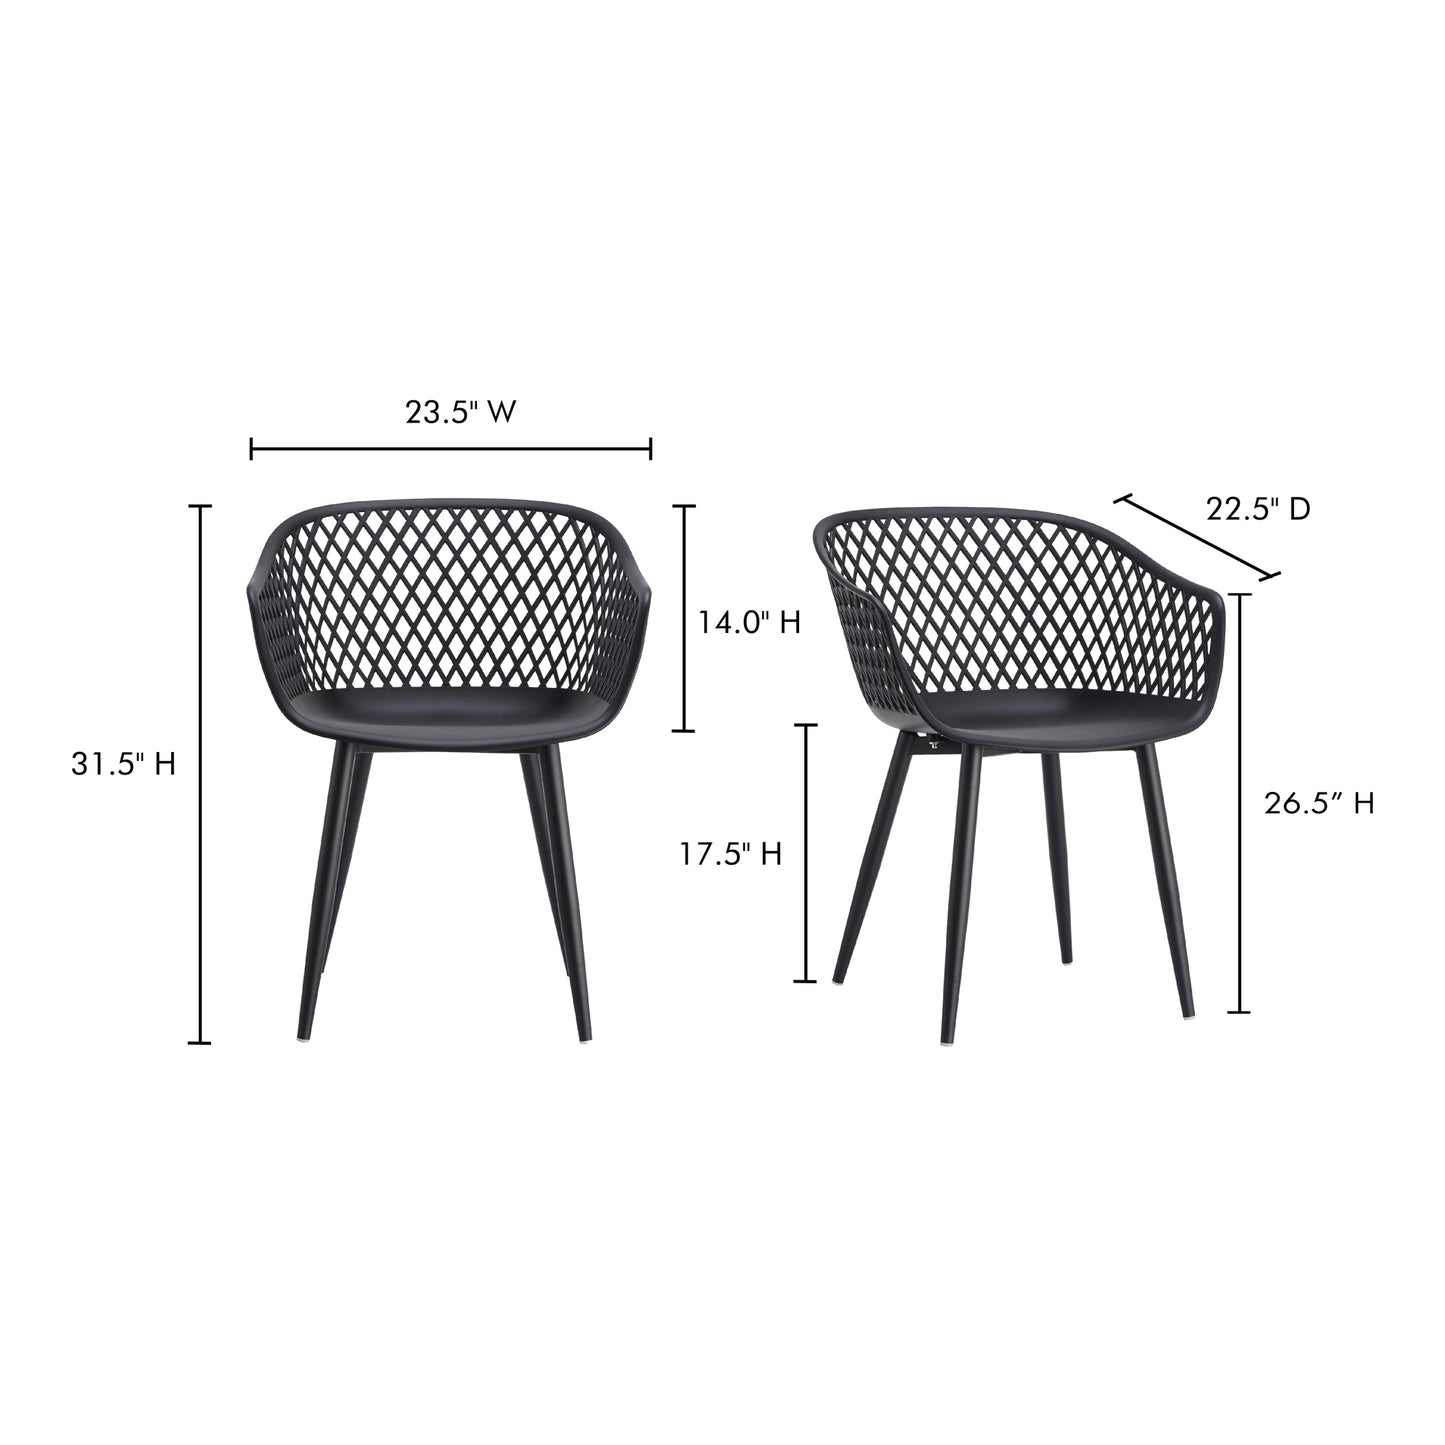 Piazza Outdoor Chair-M2